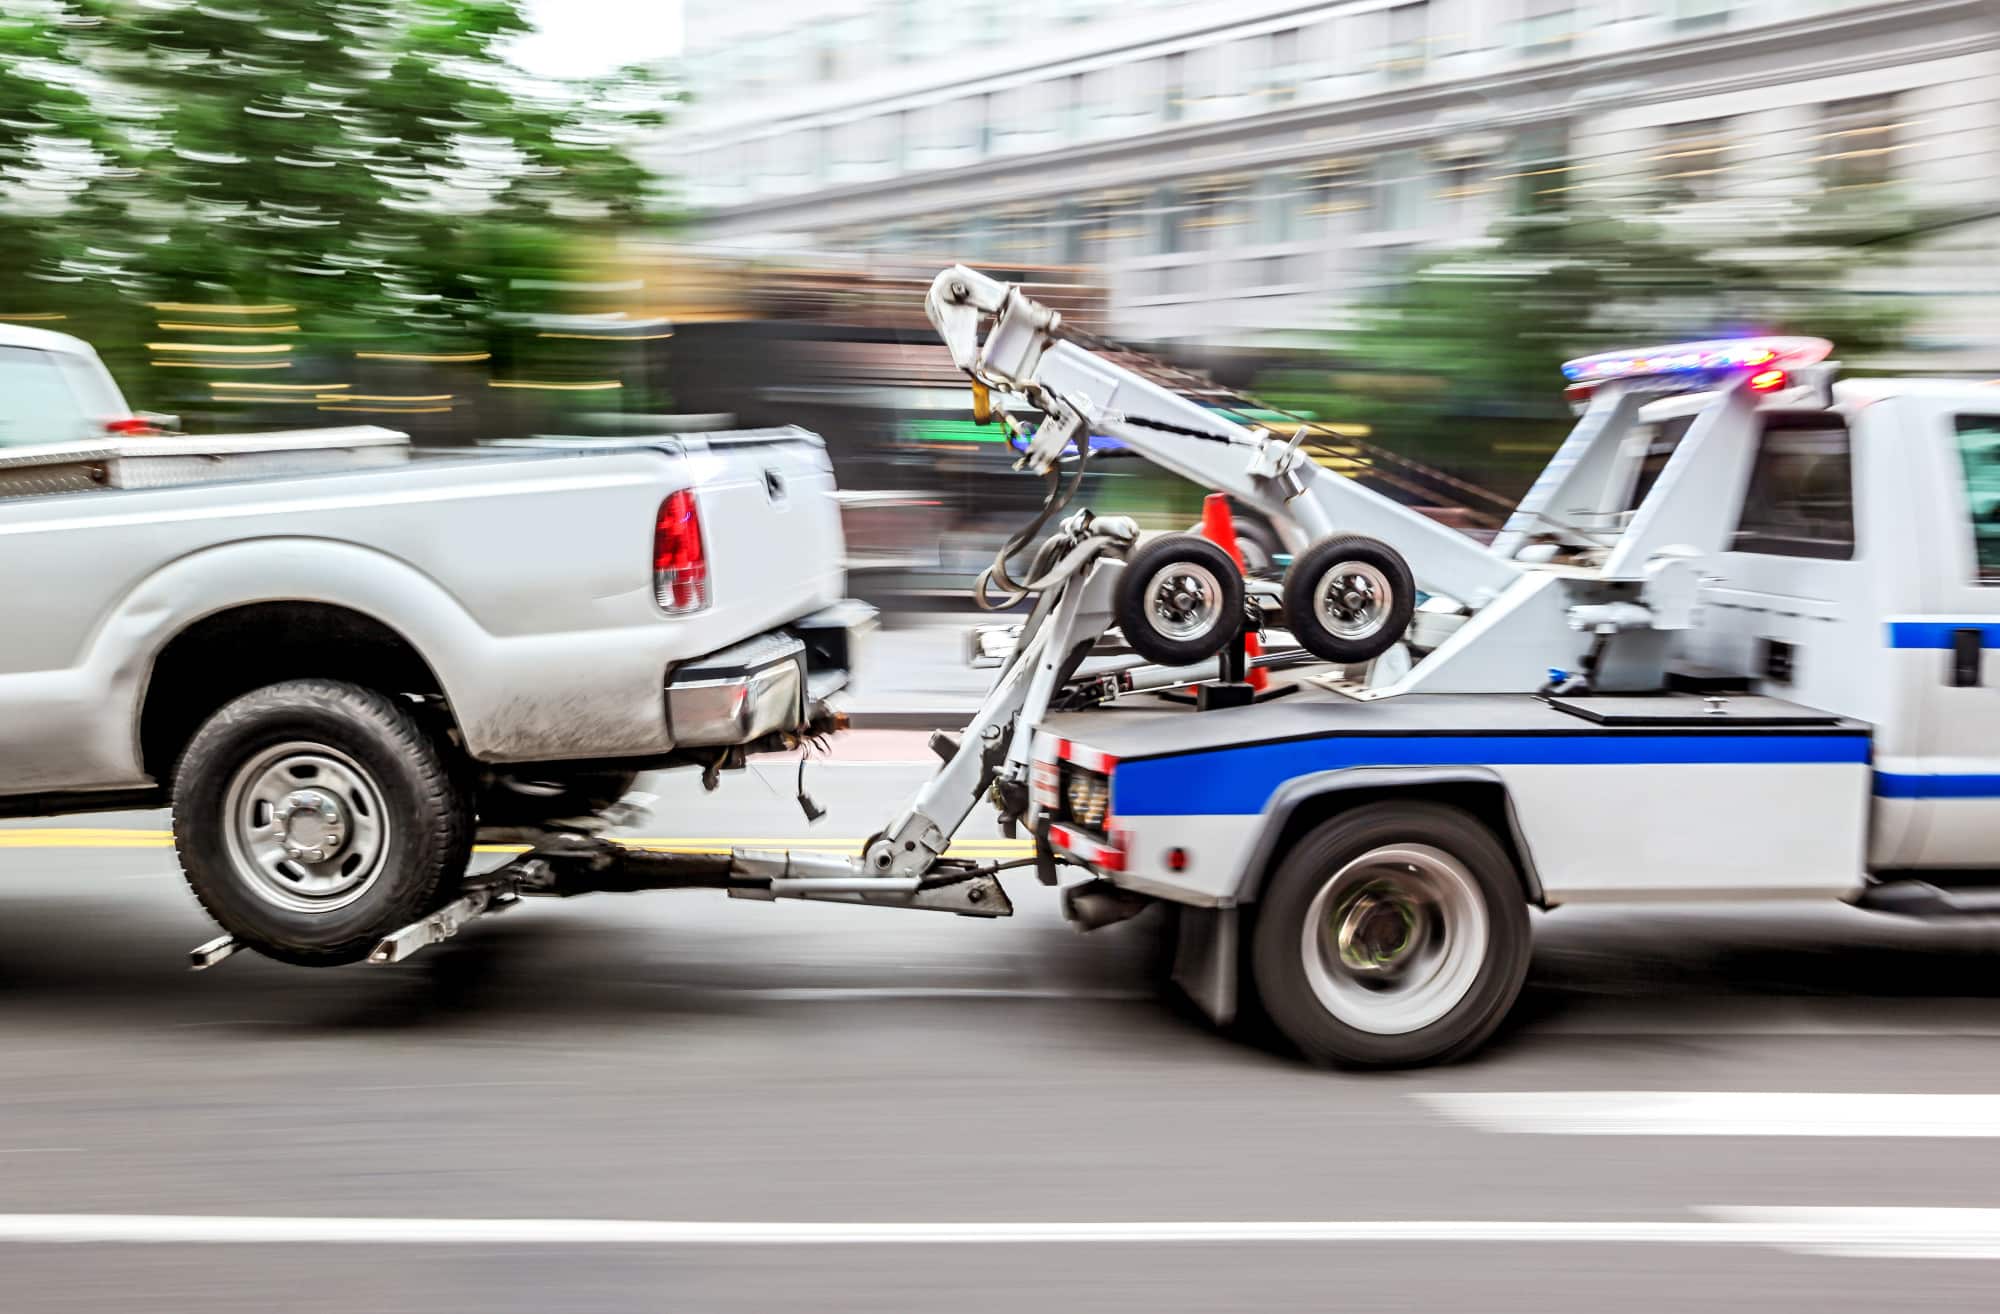 5 Reasons to Hire a Tow Service